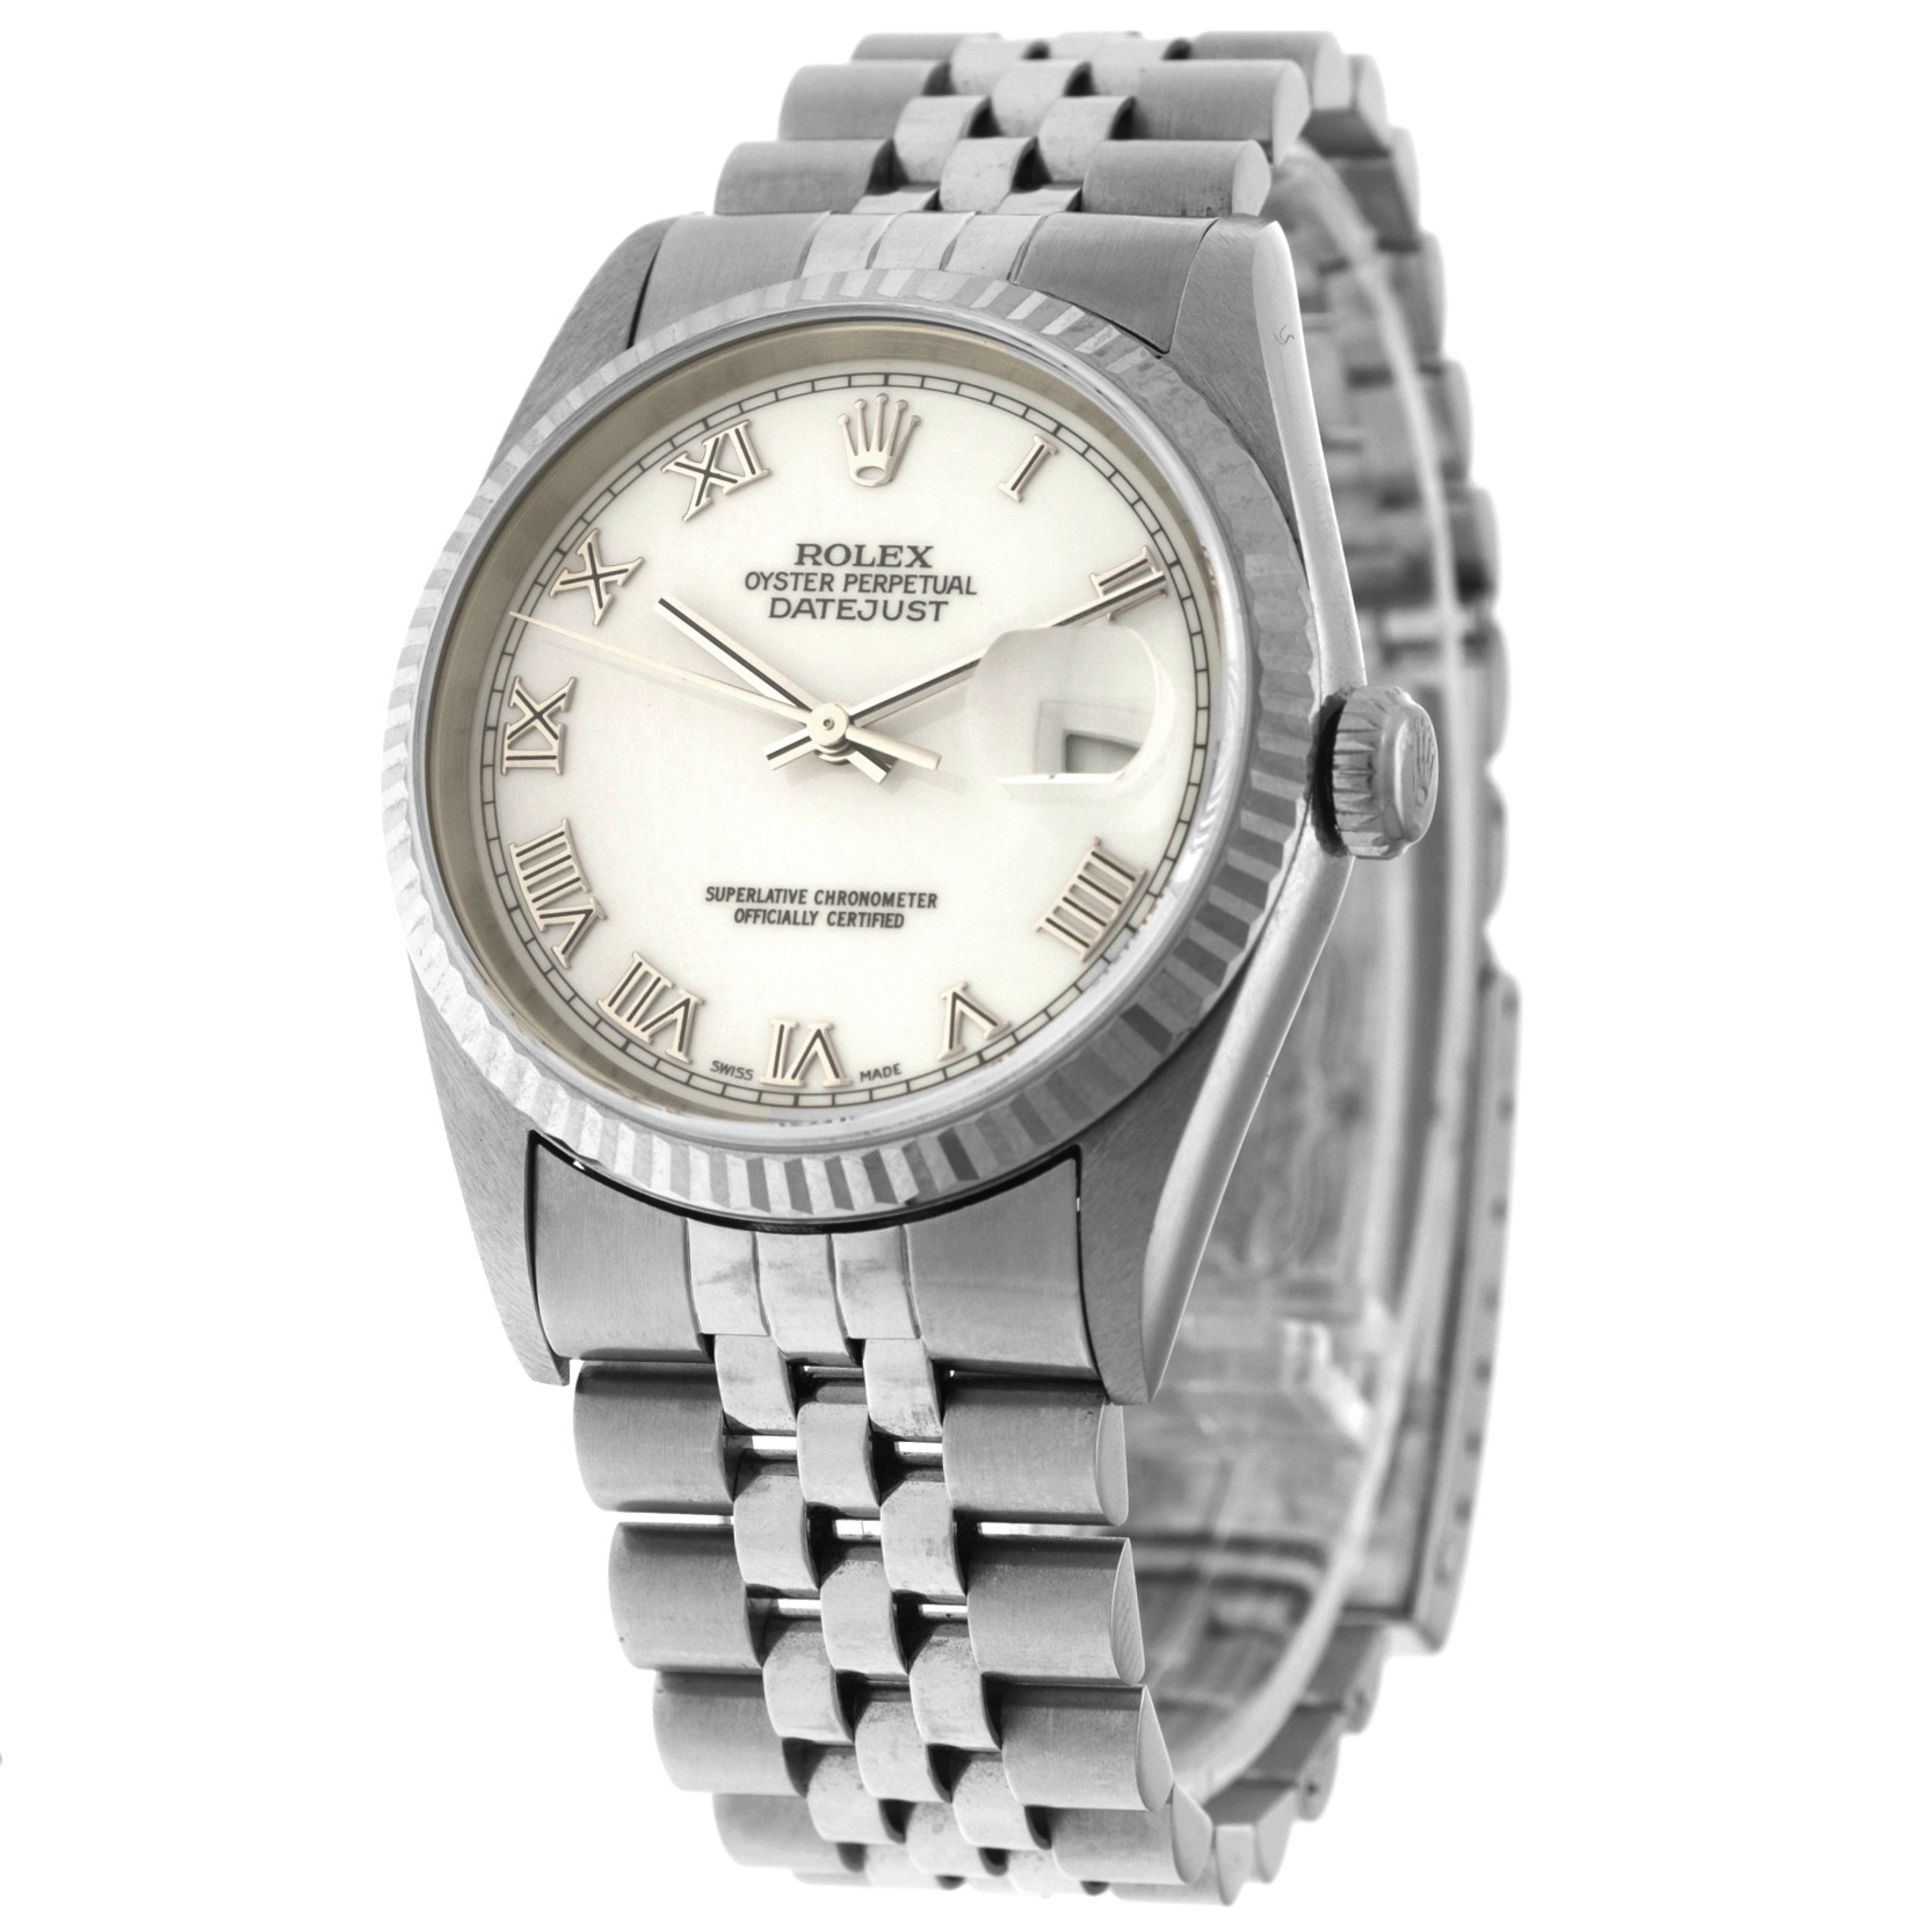 No Reserve - Rolex Datejust 36 16234 - Men's watch - approx. 1997. - Image 2 of 5